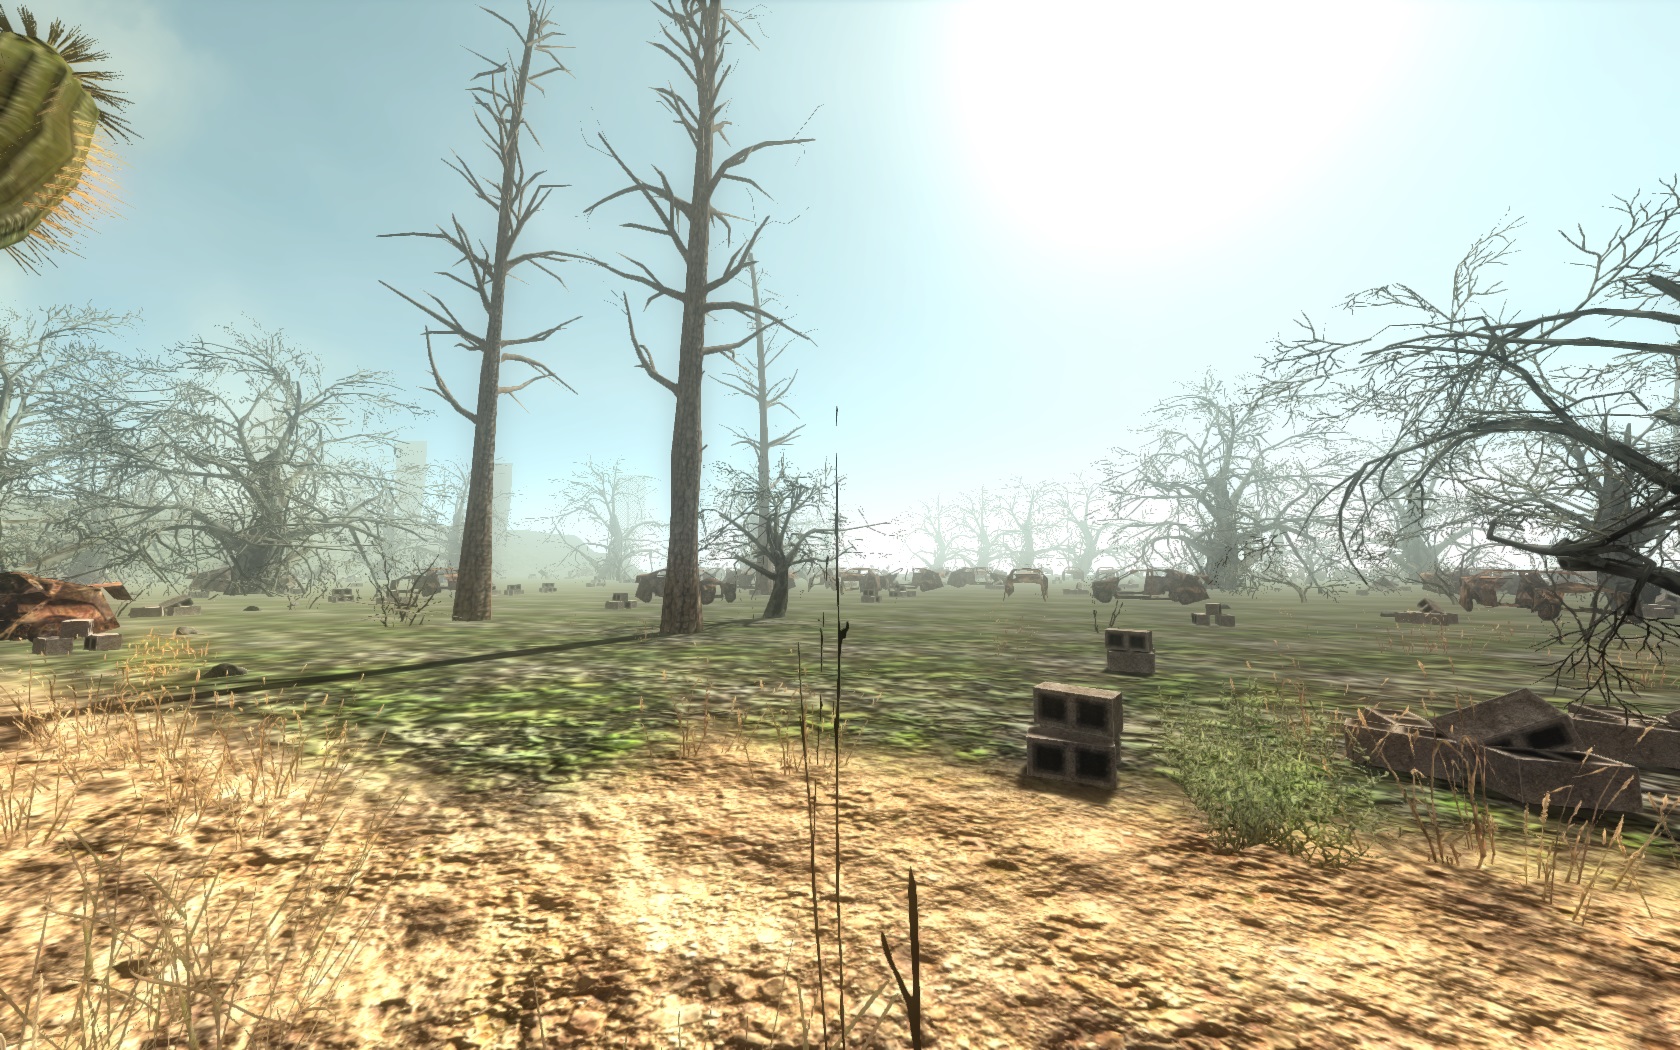 7 Days to Die - BIOMES Guide - Nuclear Fallout Biome: